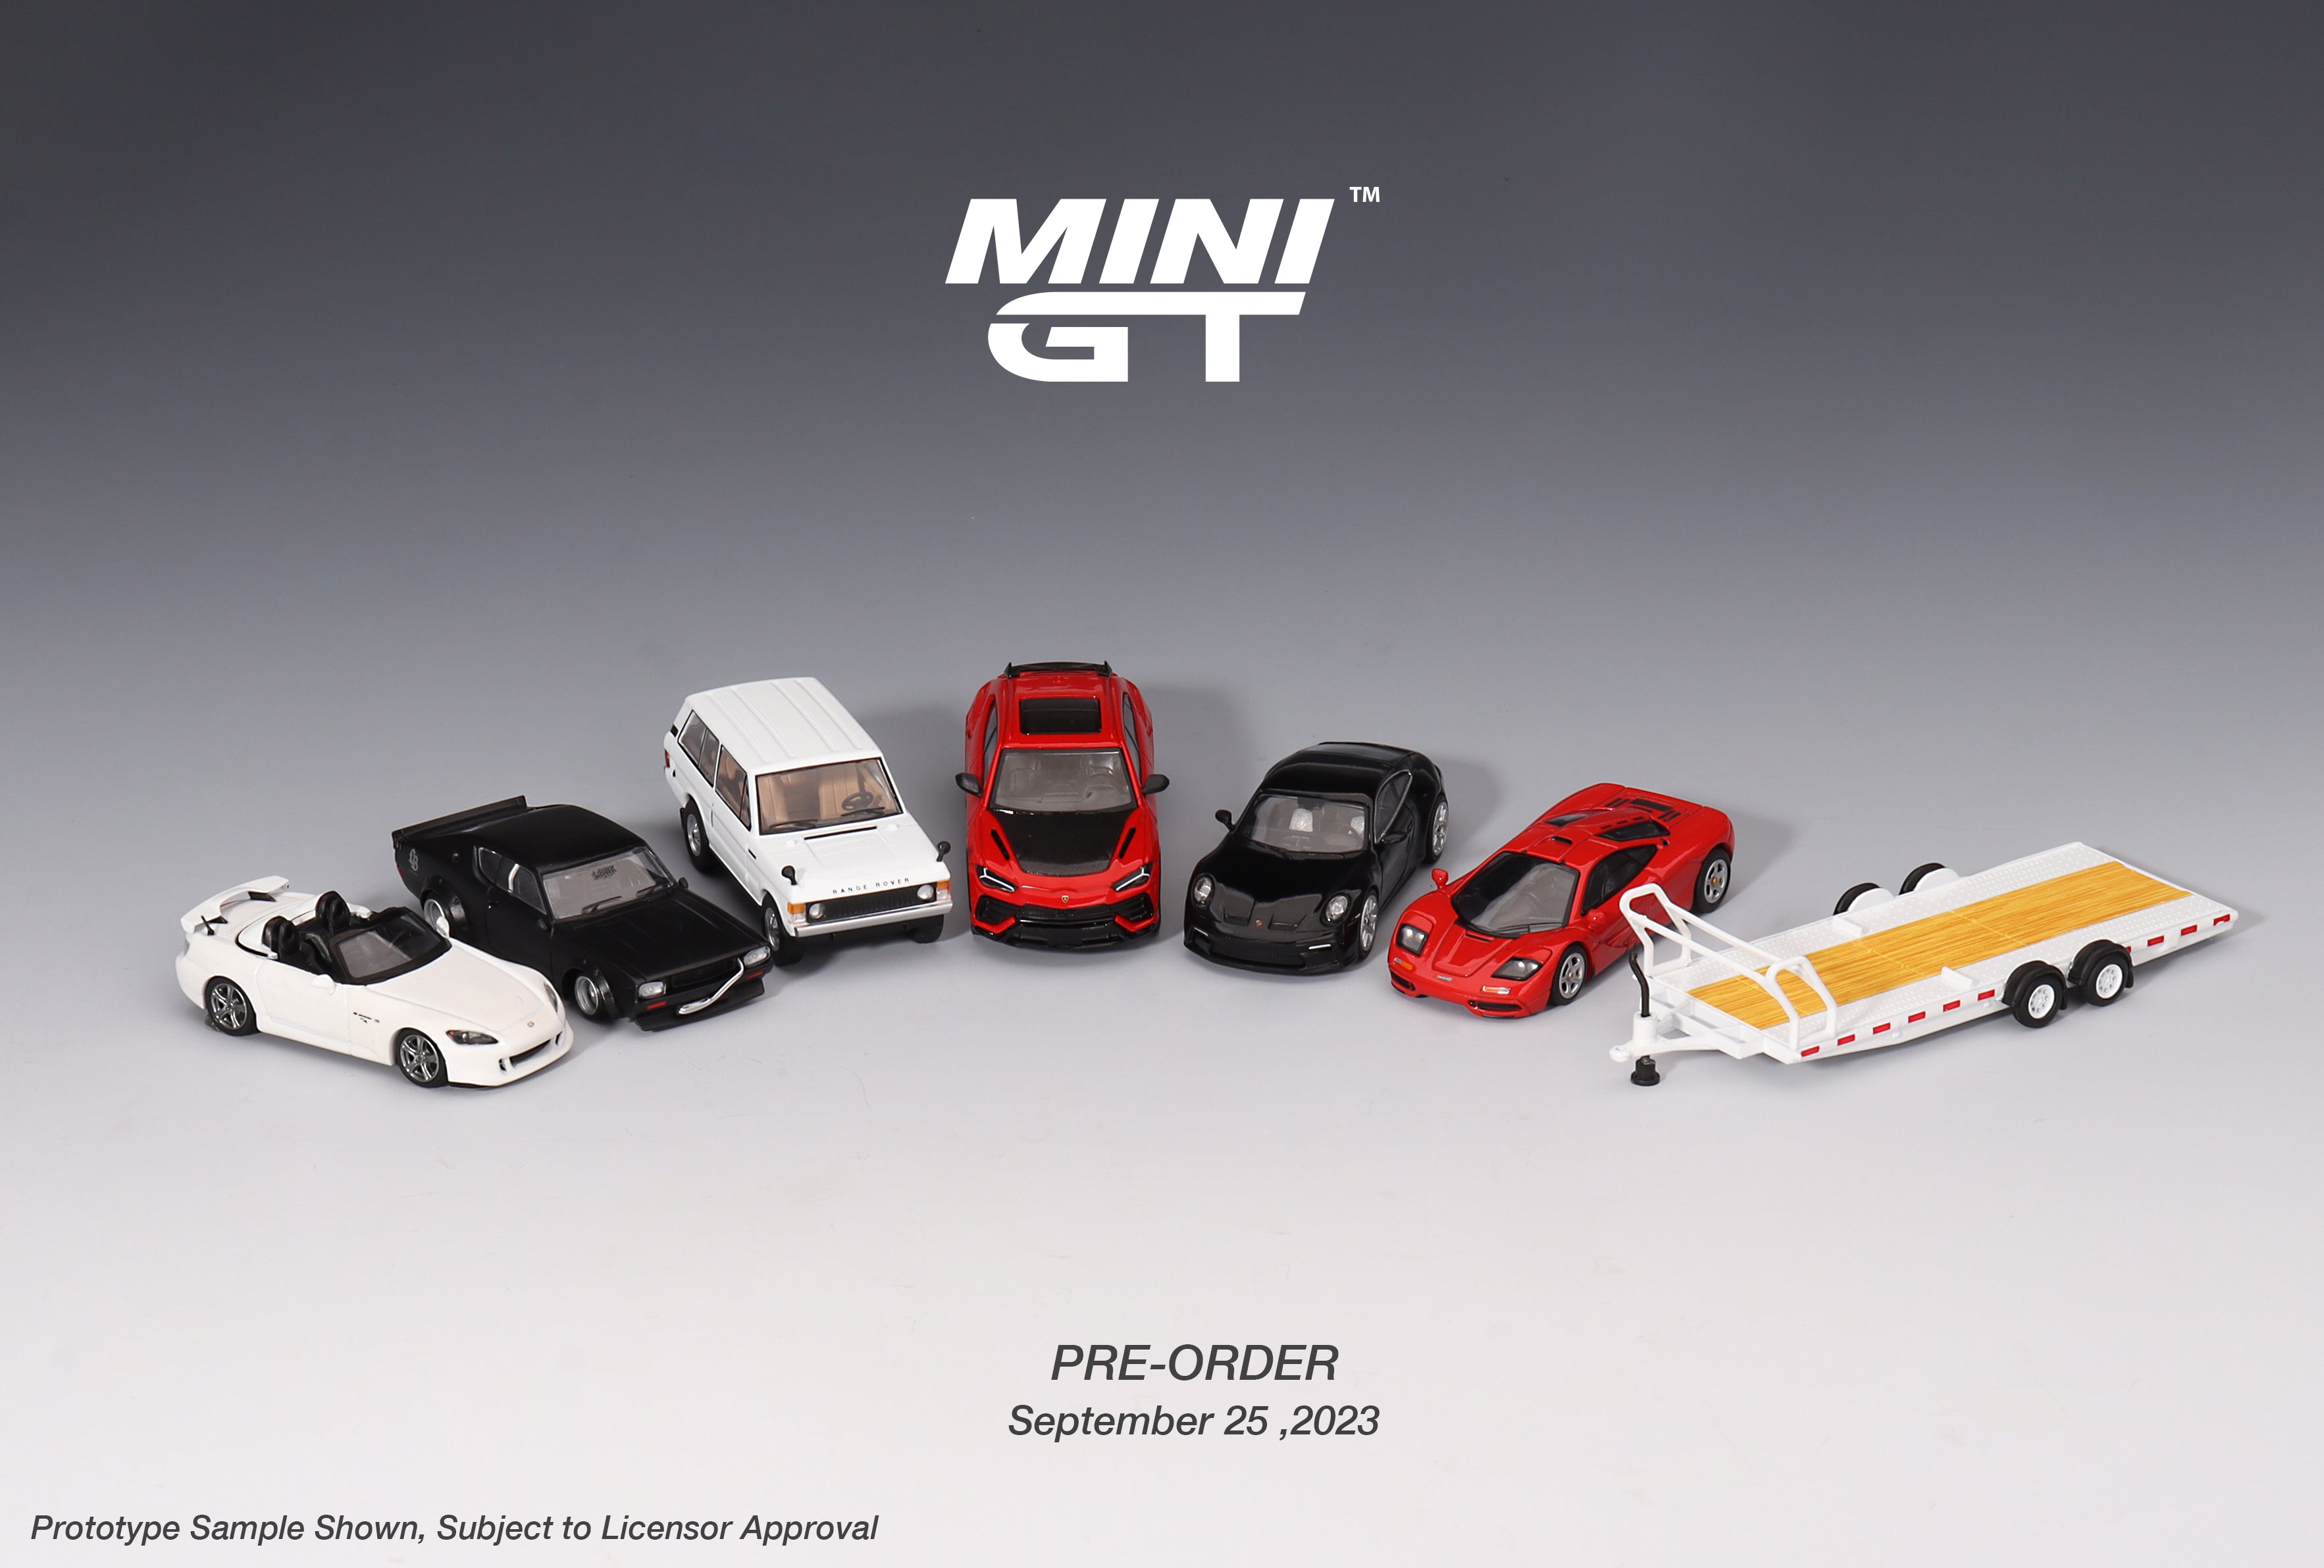 Toy Space Mini GT